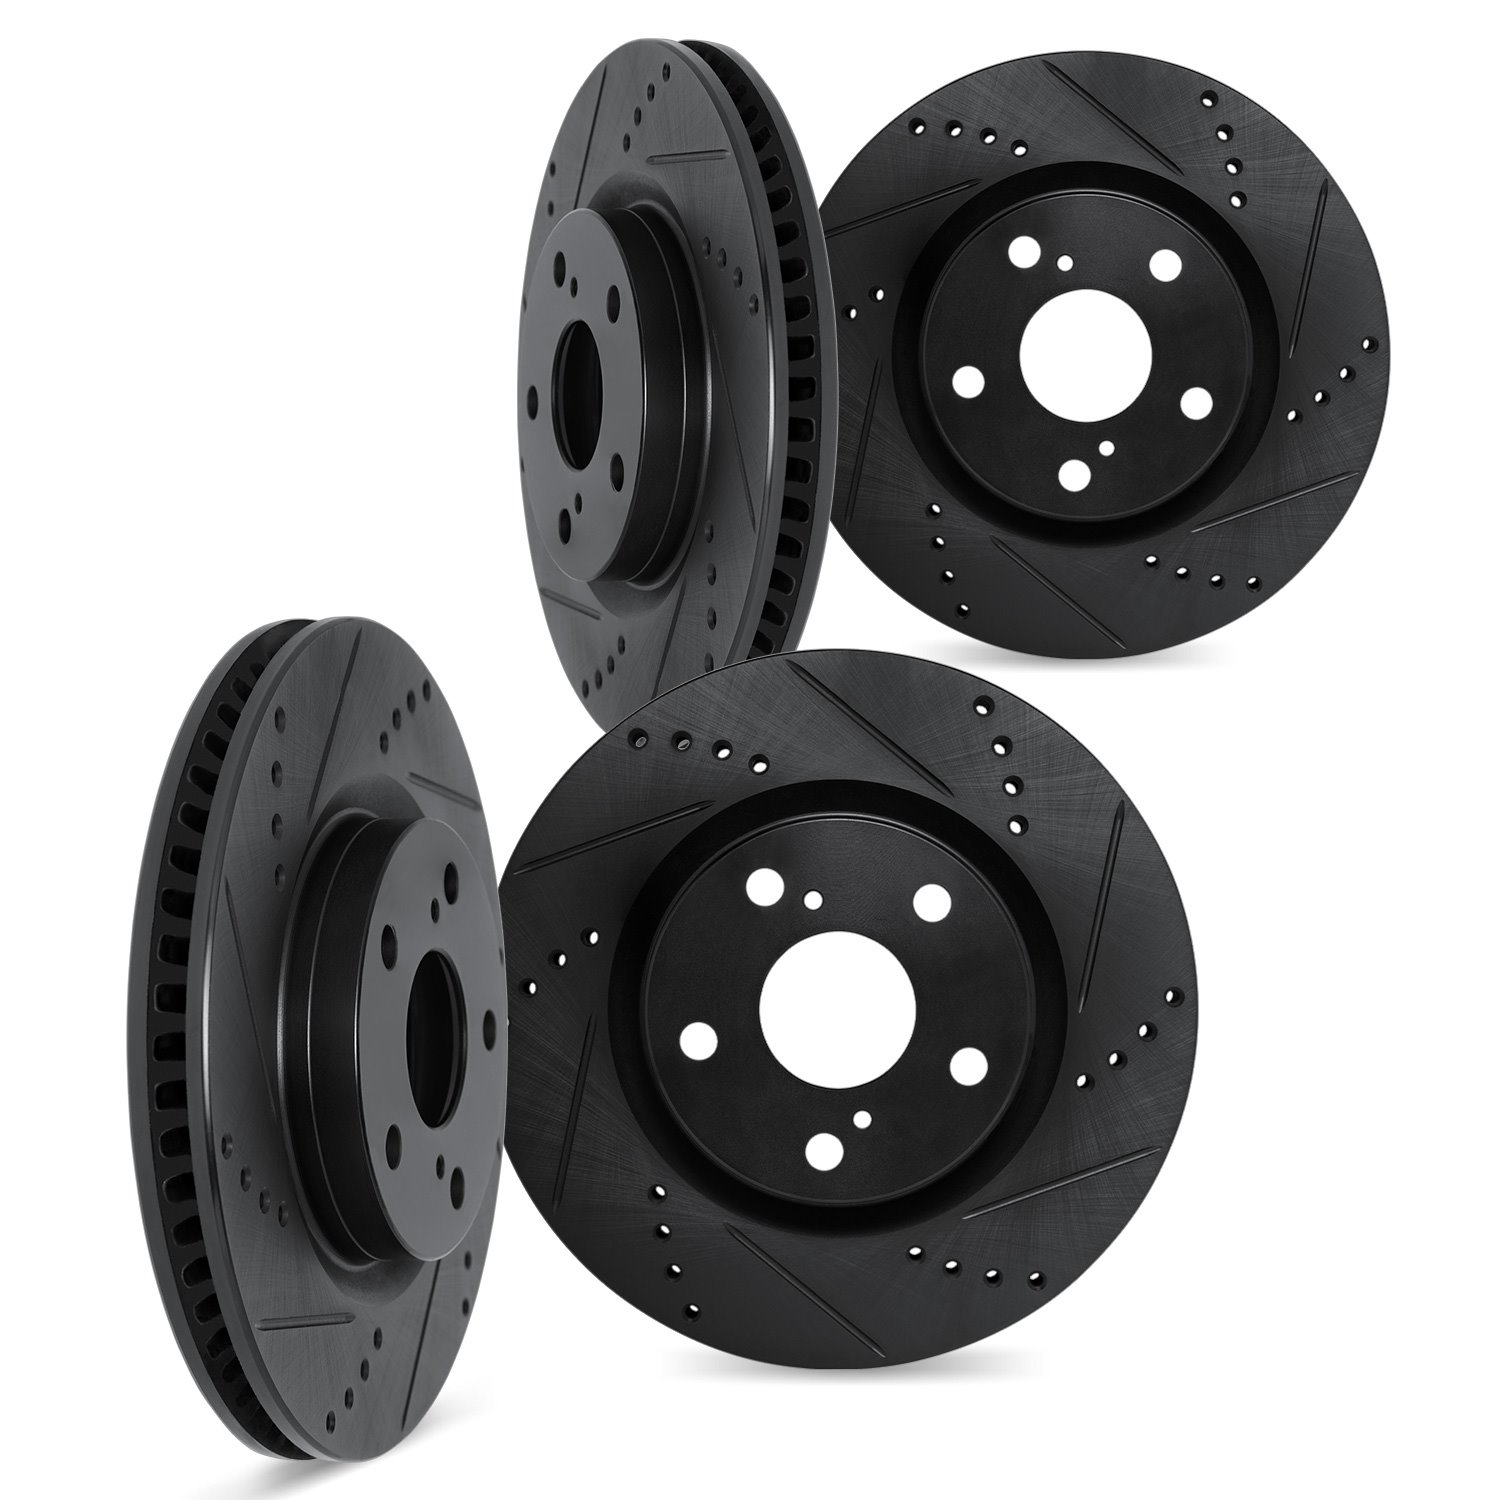 8004-54134 Drilled/Slotted Brake Rotors [Black], Fits Select Ford/Lincoln/Mercury/Mazda, Position: Front and Rear